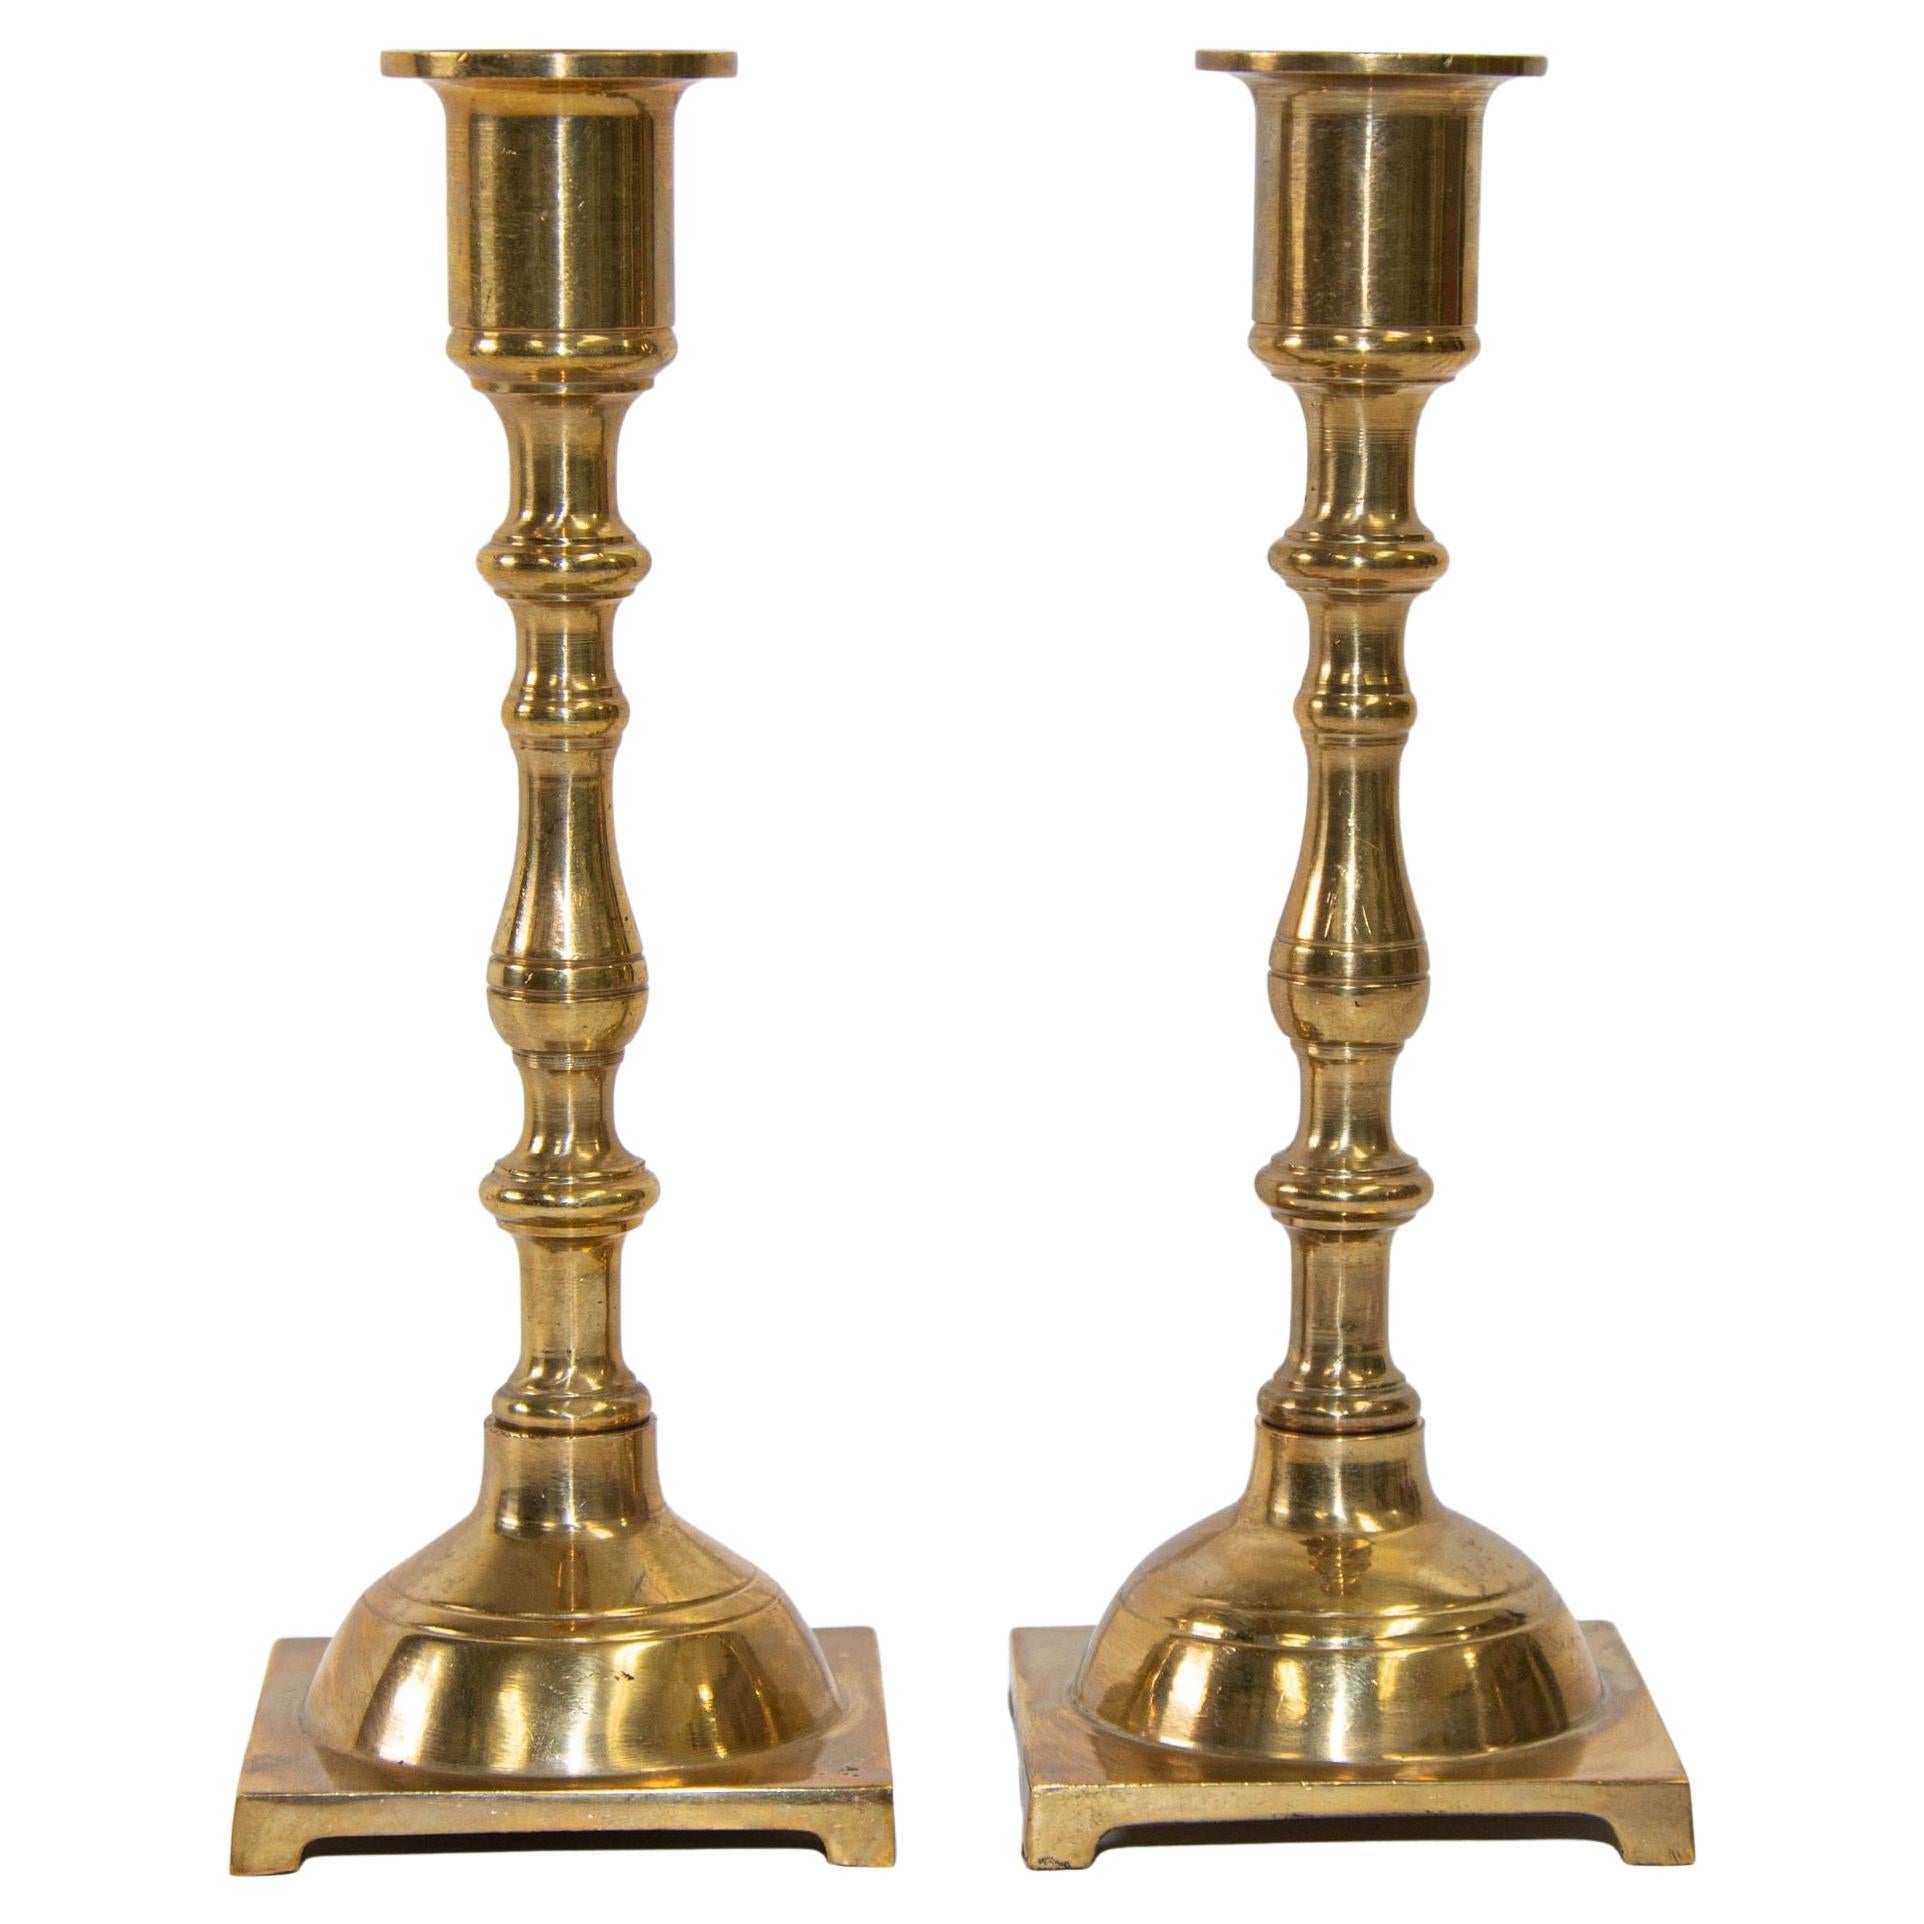 Pair of Georgian Polished Brass Candlesticks with Square Base